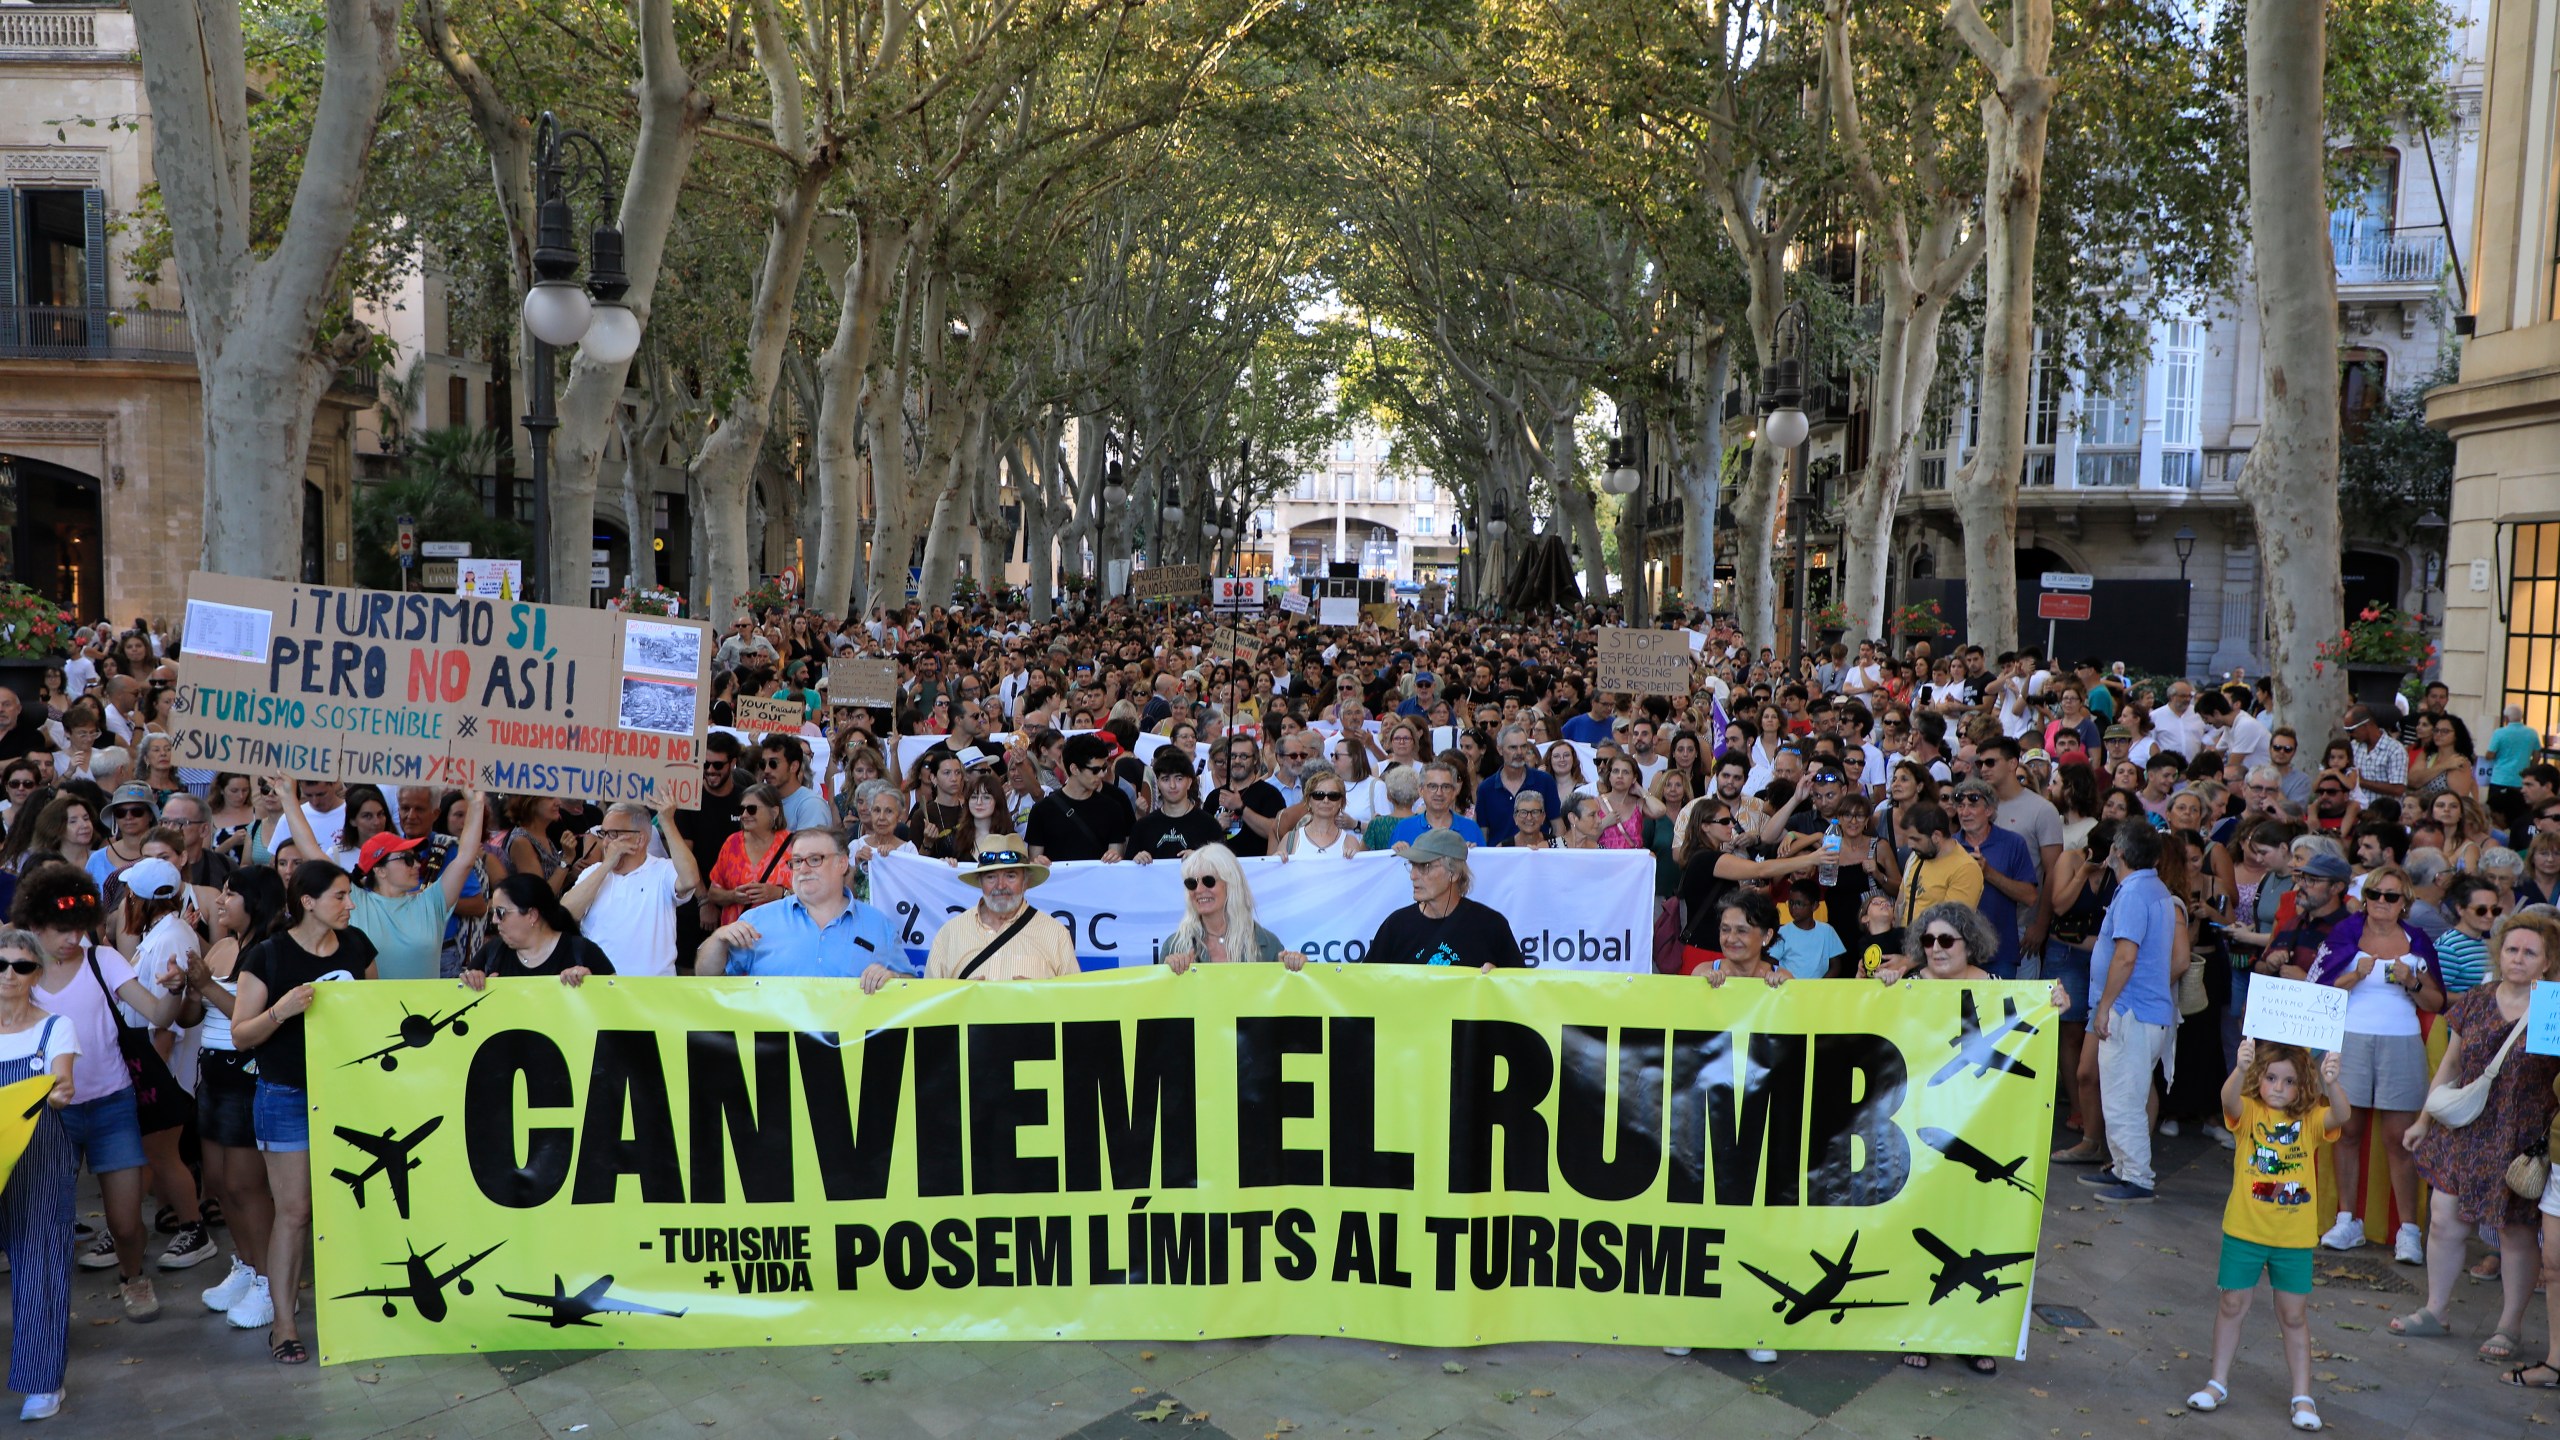 Participants take part in a demonstration against mass tourism on Mallorca in Spain.